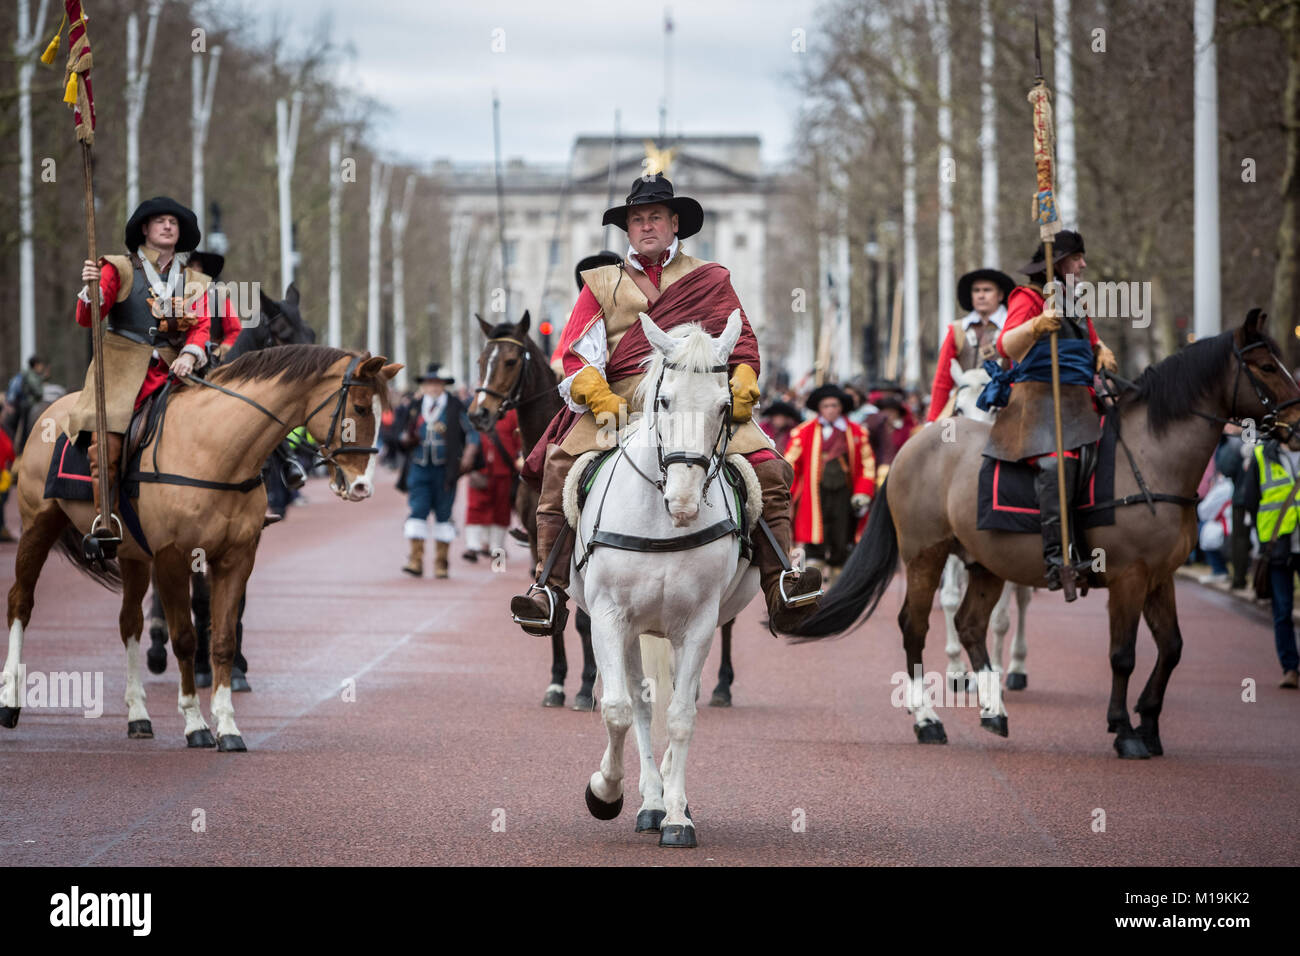 London, UK. 28th January 2018. The King’s Army annual march and parade commemorating the execution of King Charles Ist. Many members of the English Civil War Society, dressed in traditional 17th century clothing, marched and rode horseback from St. James' Palace towards Horse Guards Parade re-enacting King Charles I's walk to the Banqueting House in 1649. Credit: Guy Corbishley/Alamy Live News Stock Photo